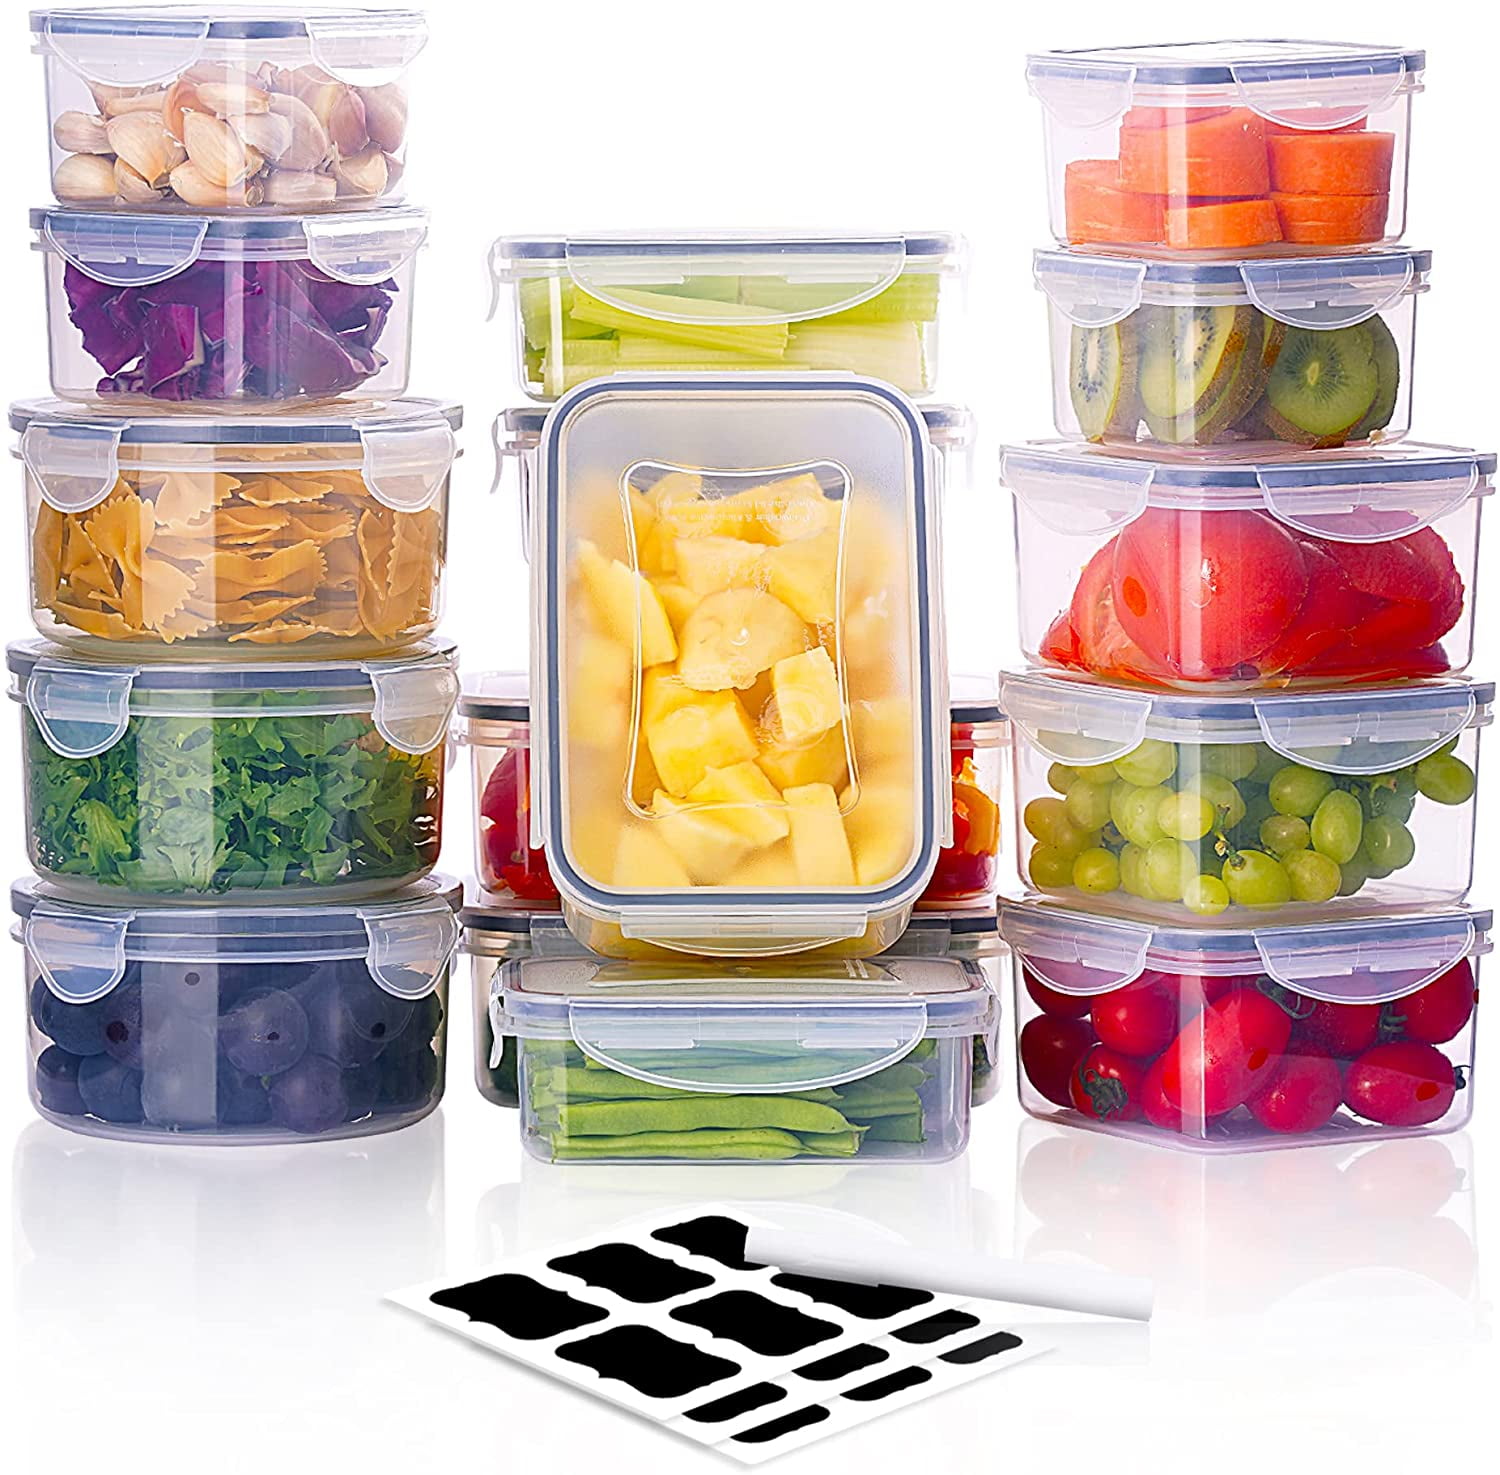 meekoo Set of 3 Food Container Sets Square Food Storage Containers with  Lids 4 Quart Large Plastic Brining Container with Lid Commercial Clear